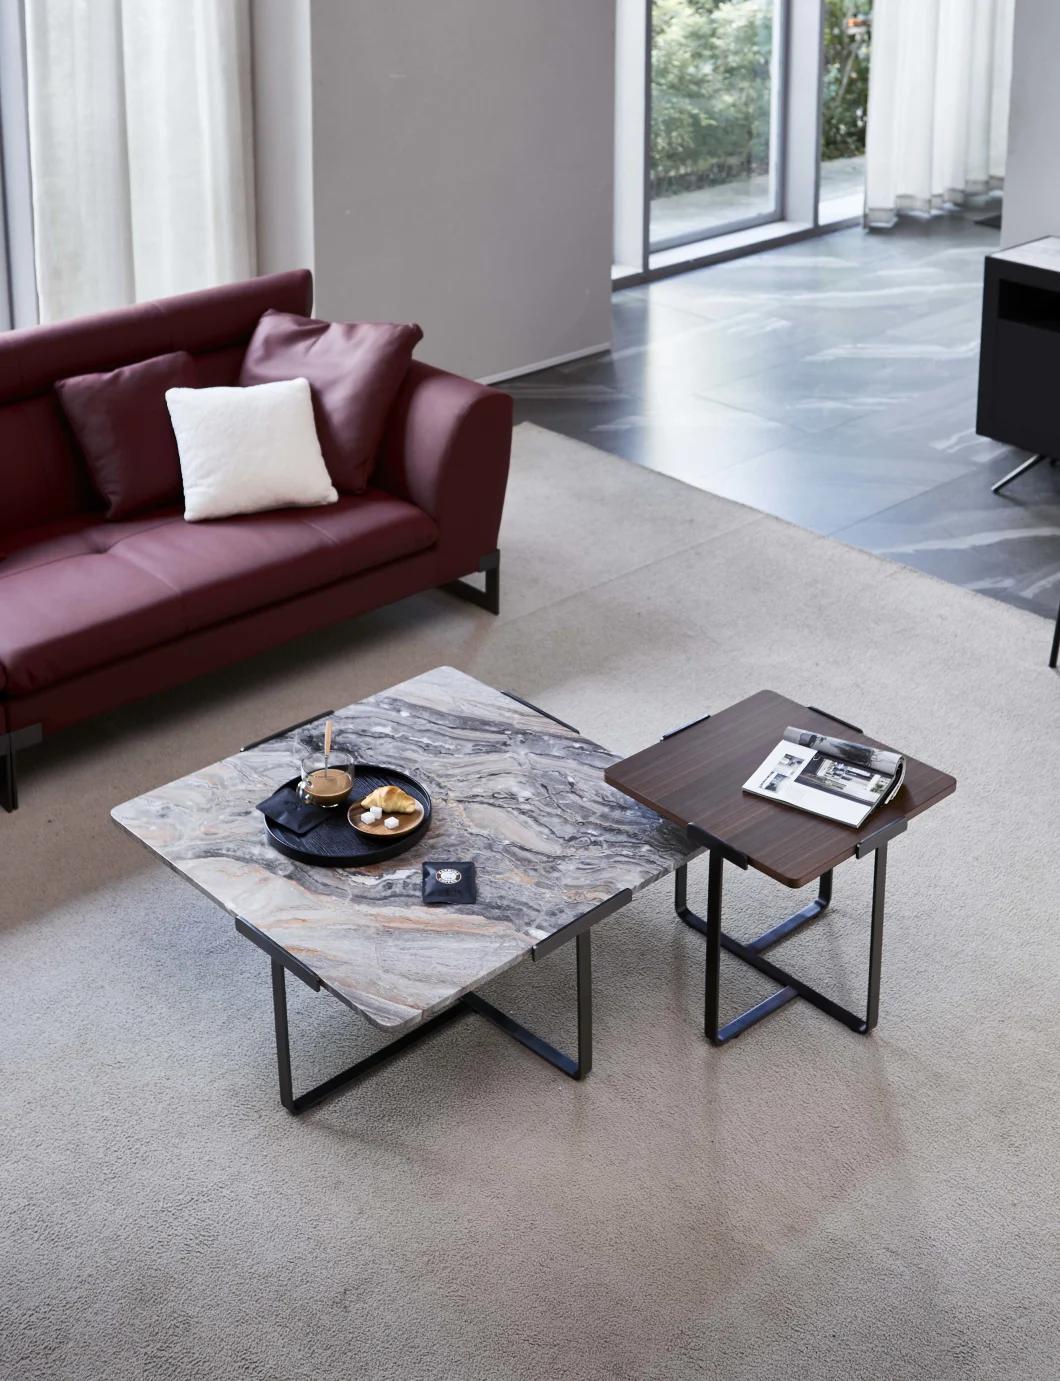 CT45A Natural Marble Top Coffee Table, Natural Marble Top Metal Base Coffee Table in Home and Commercial Custom